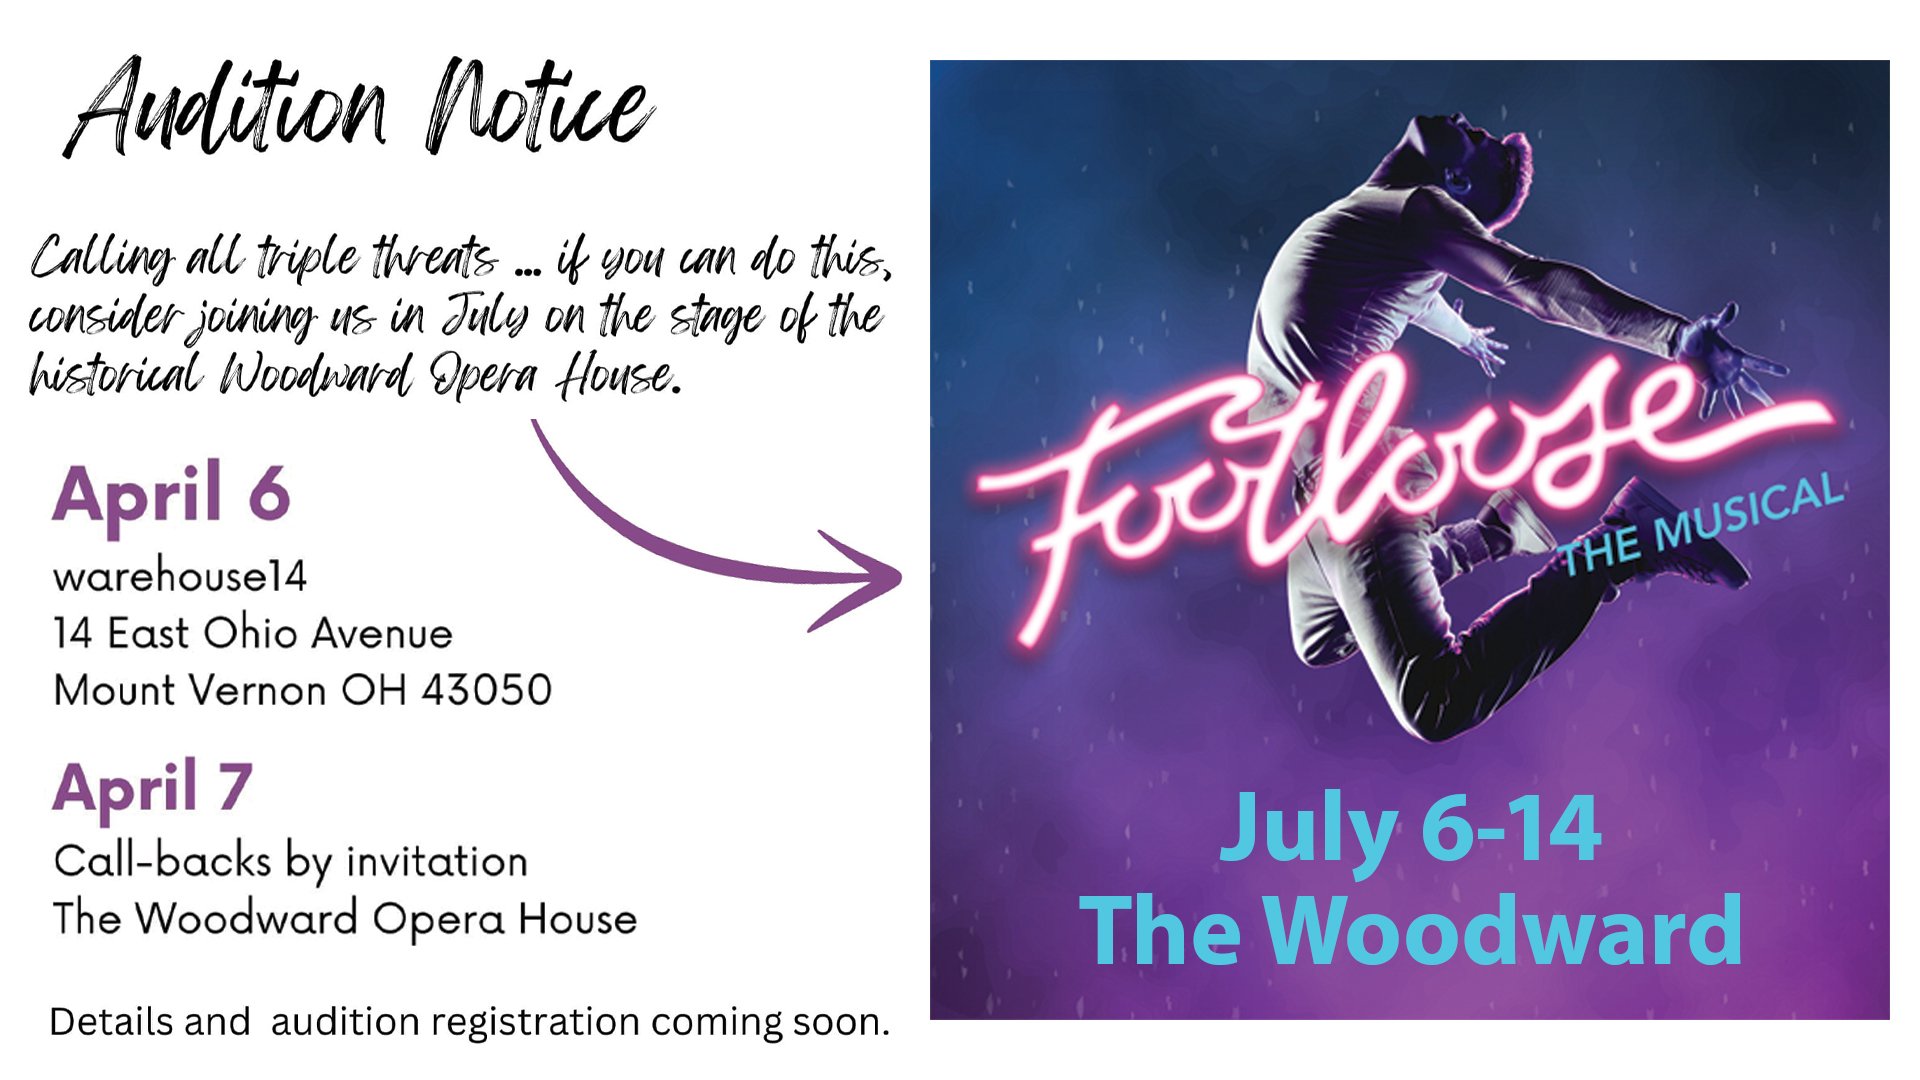 Cut loose this weekend with MTVarts and the Public Library of Mount Vernon and Knox County! &quot;Footloose&quot; auditions are this Saturday at MTVarts' warehouse14 (info at www.mtvarts.com) and there are still FREE tickets available to see stars Da